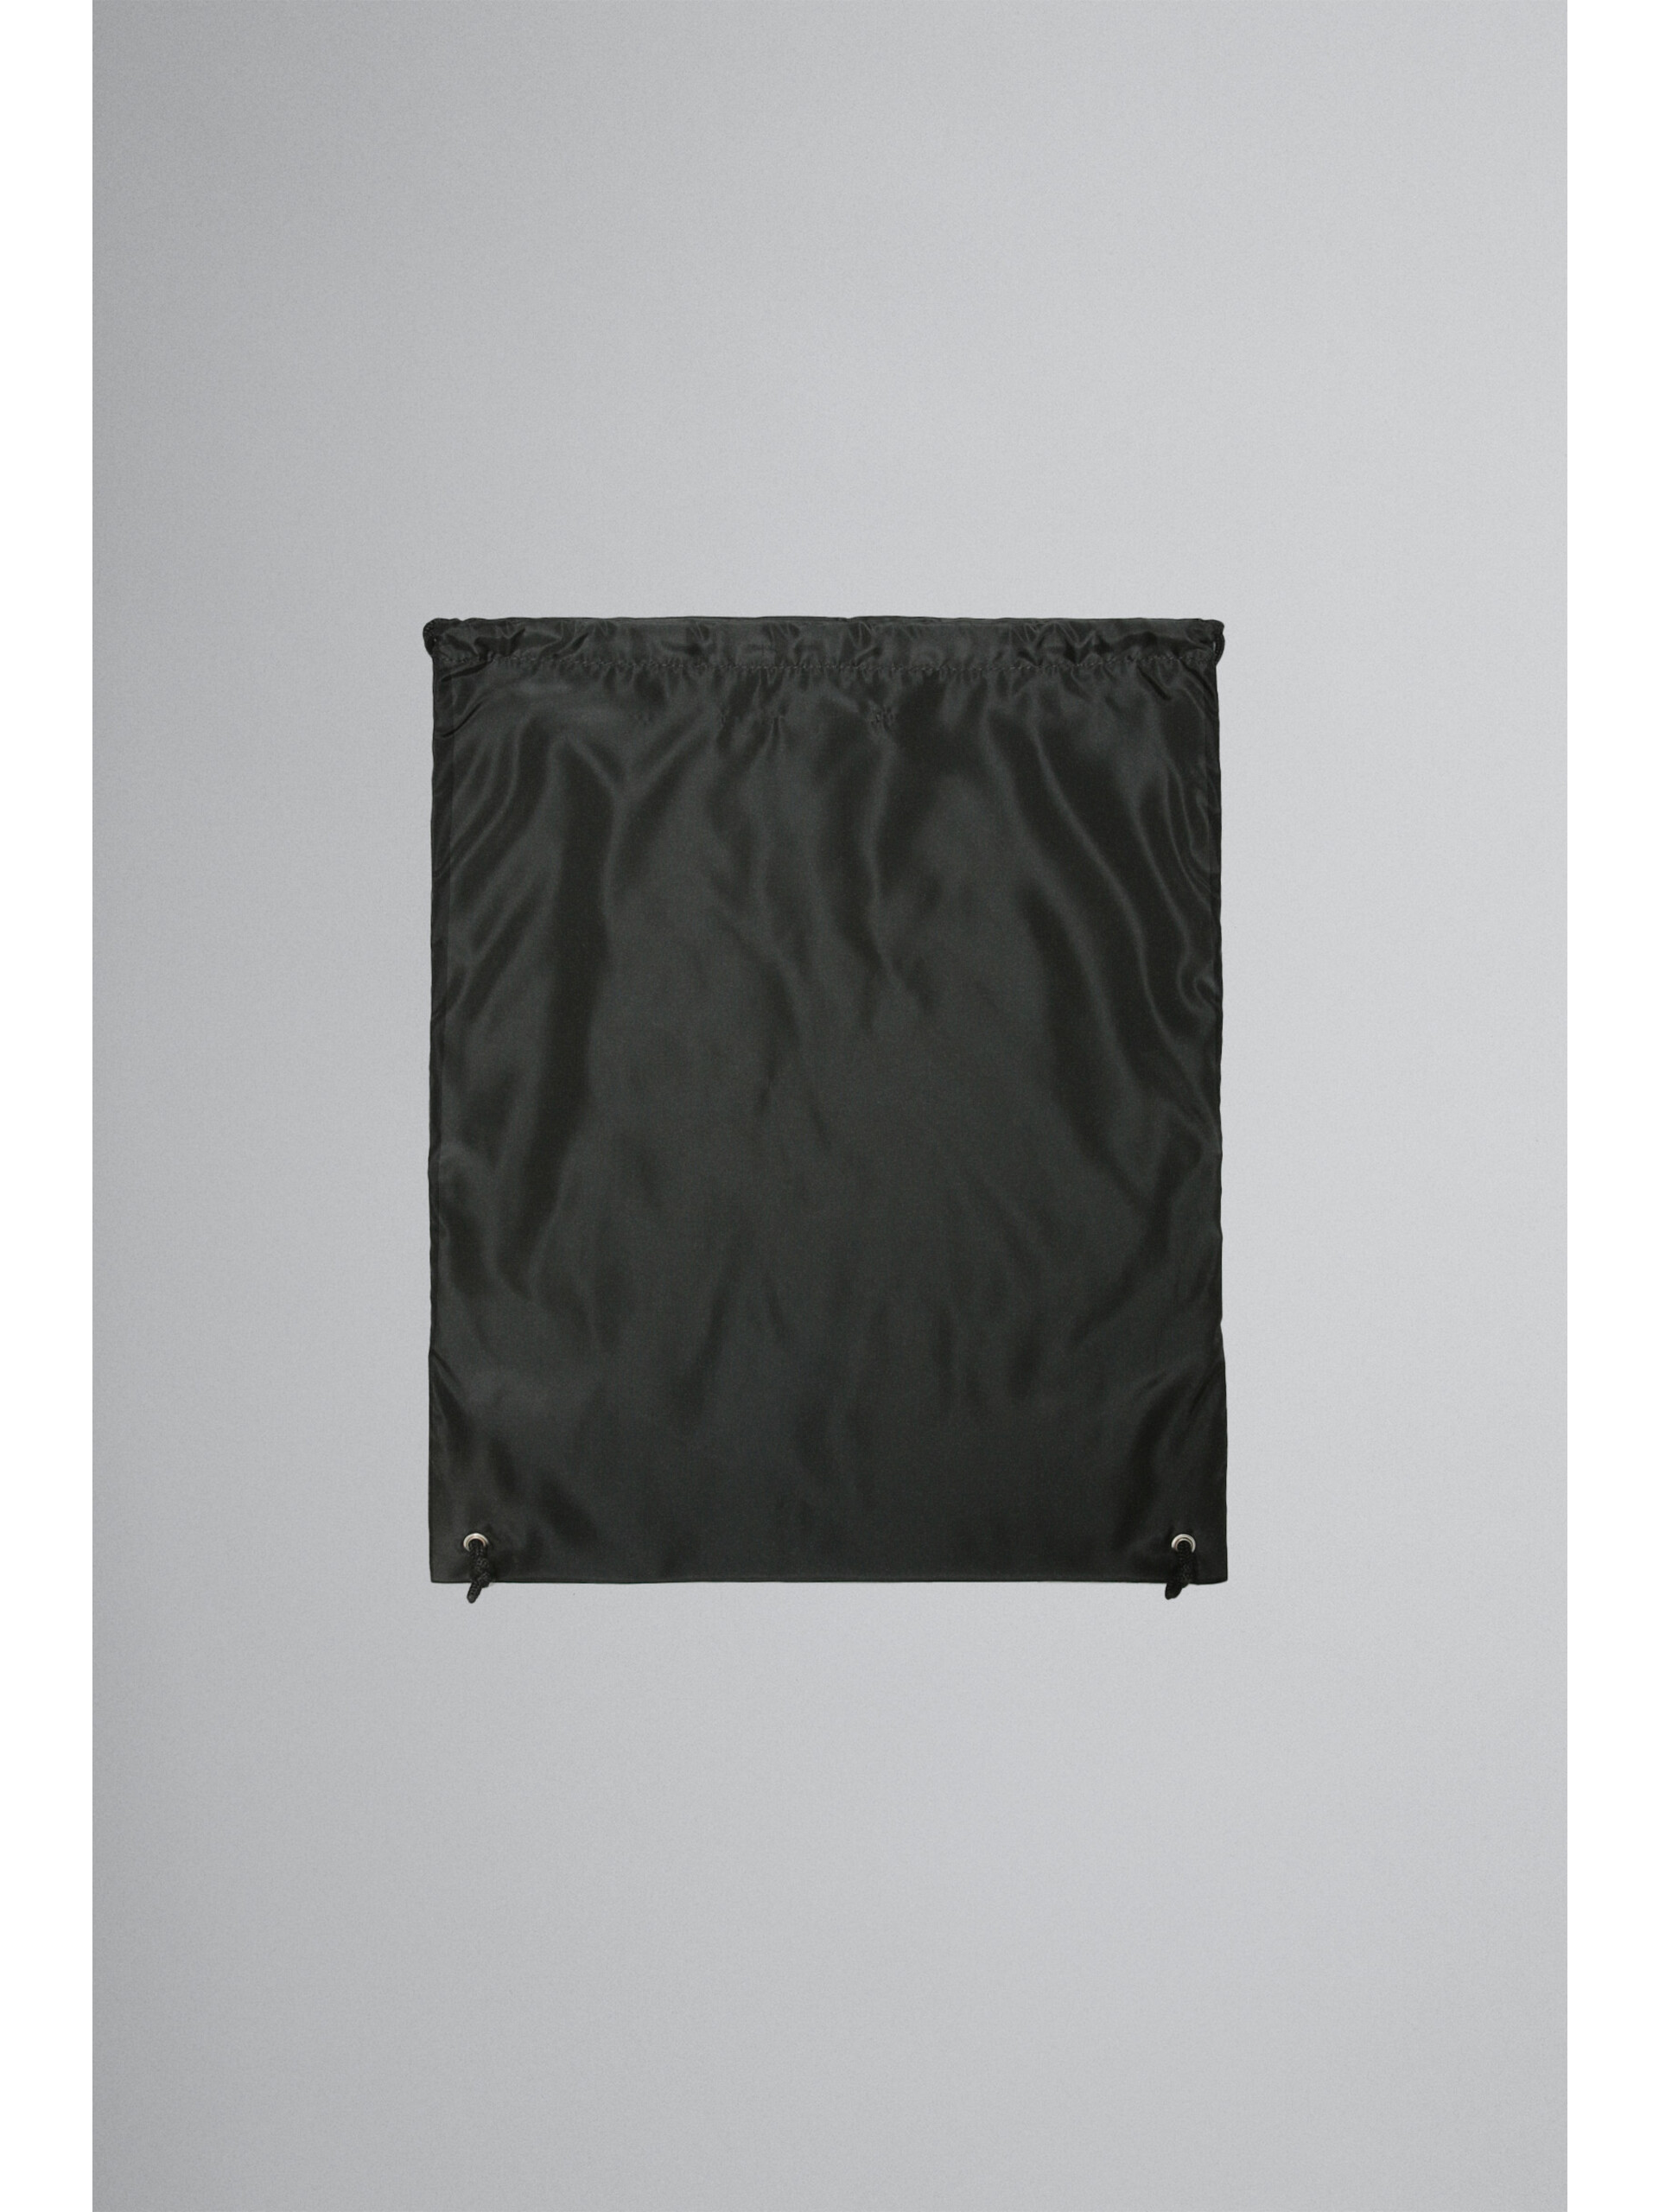 Black drawstring bag with sequin patch - Bags - Image 2